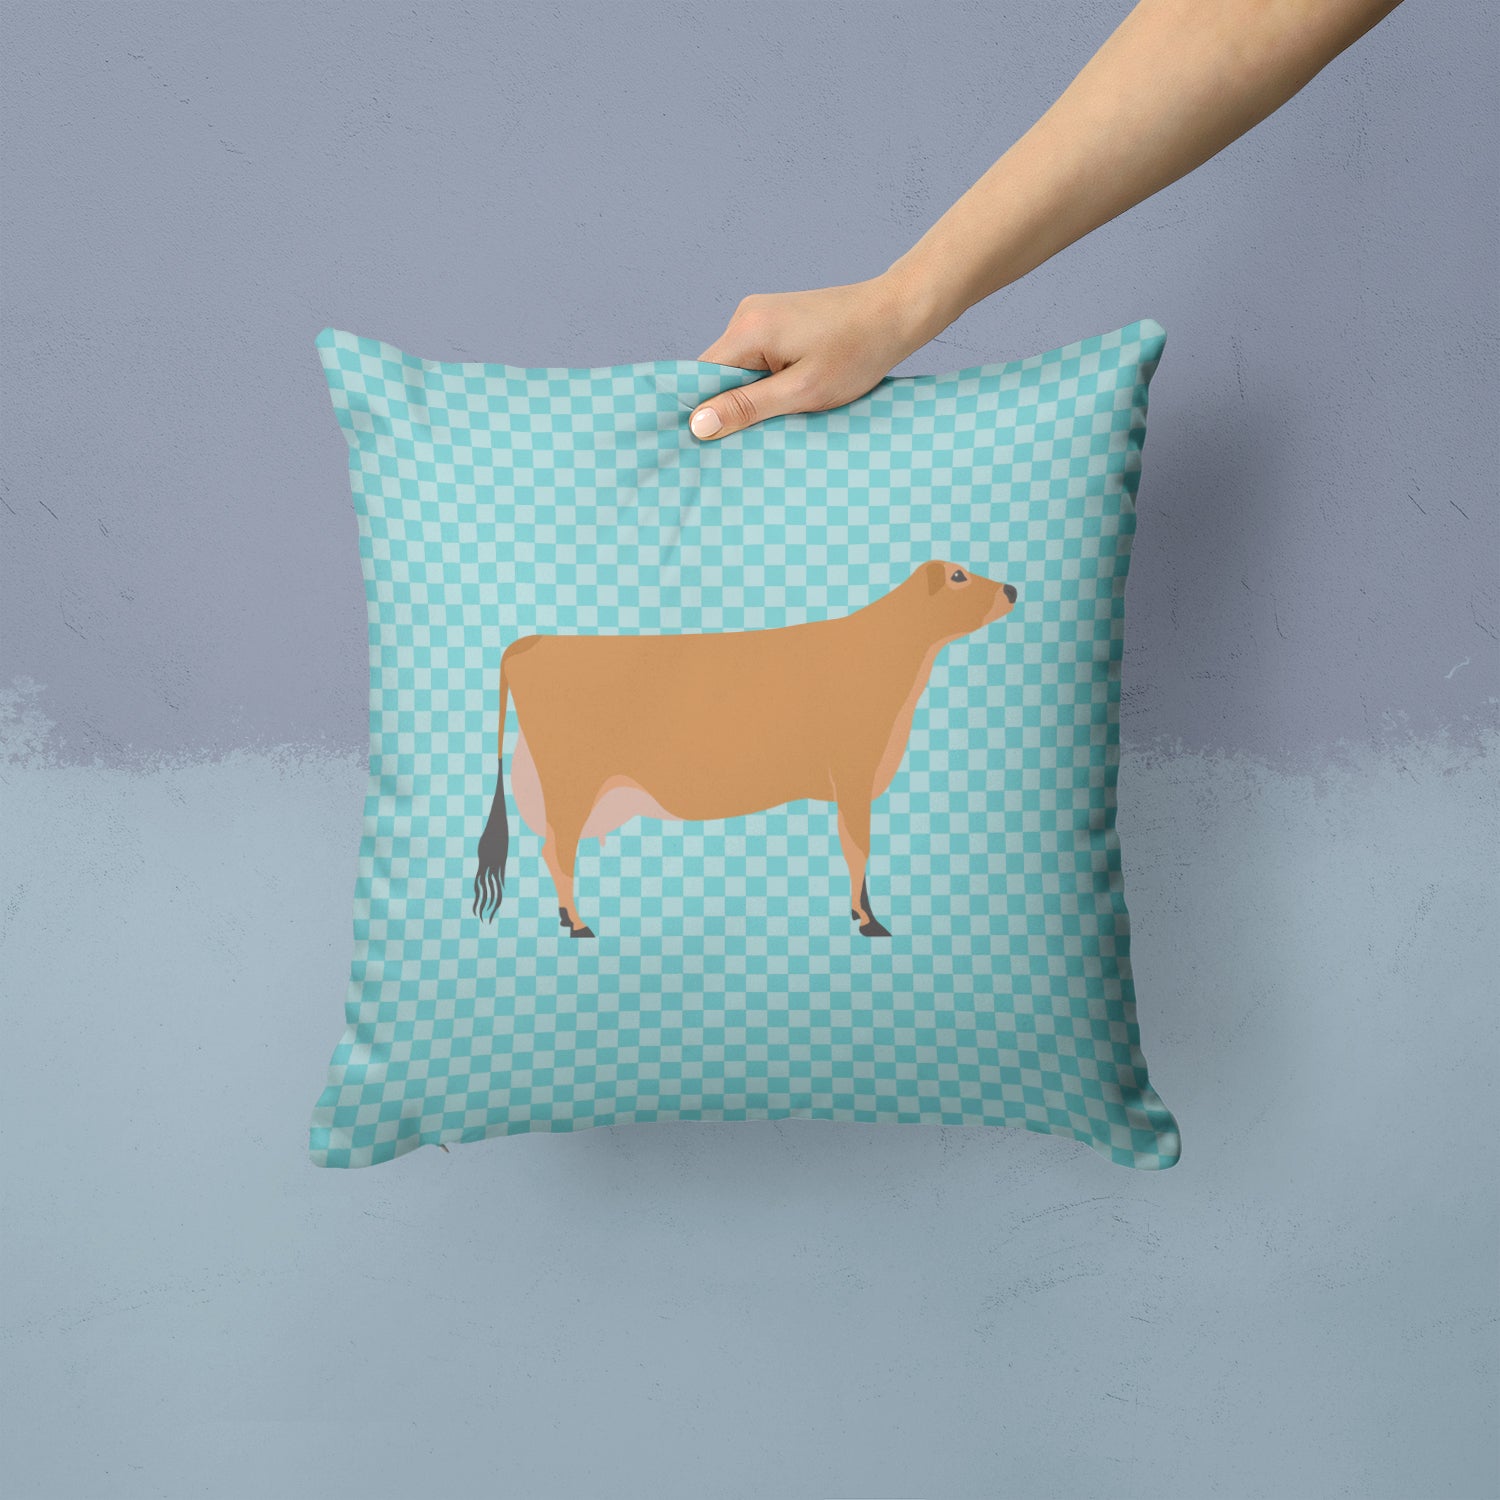 Jersey Cow Blue Check Fabric Decorative Pillow BB8003PW1414 - the-store.com